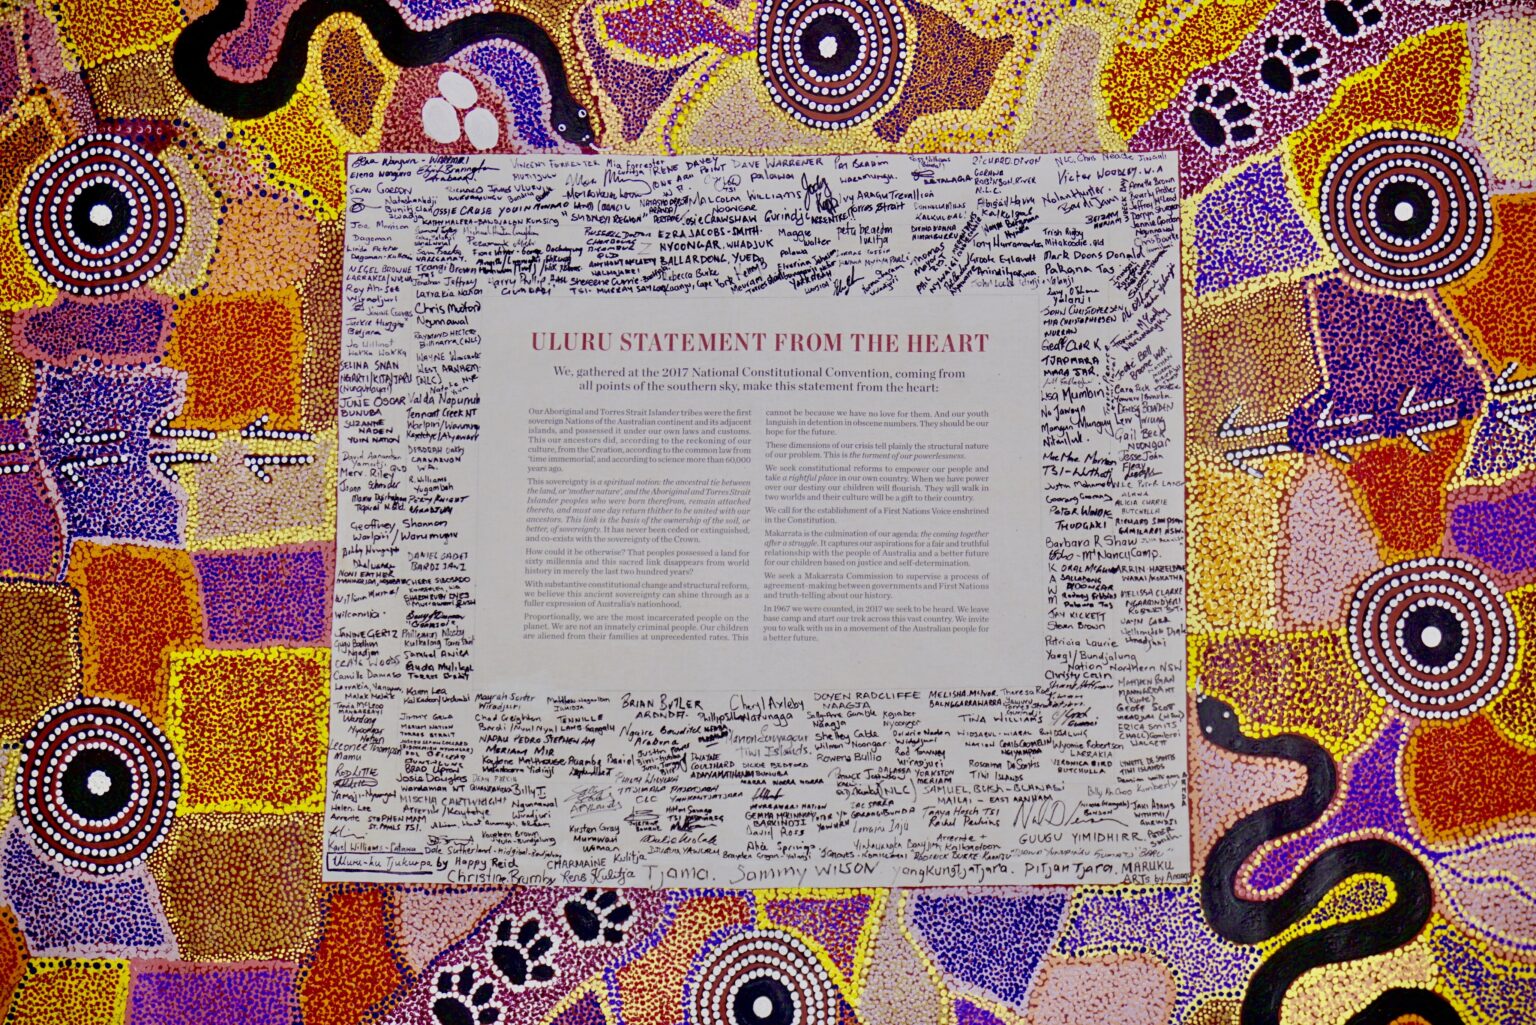 AH&MRC SUPPORTS THE ULURU STATEMENT FROM THE HEART